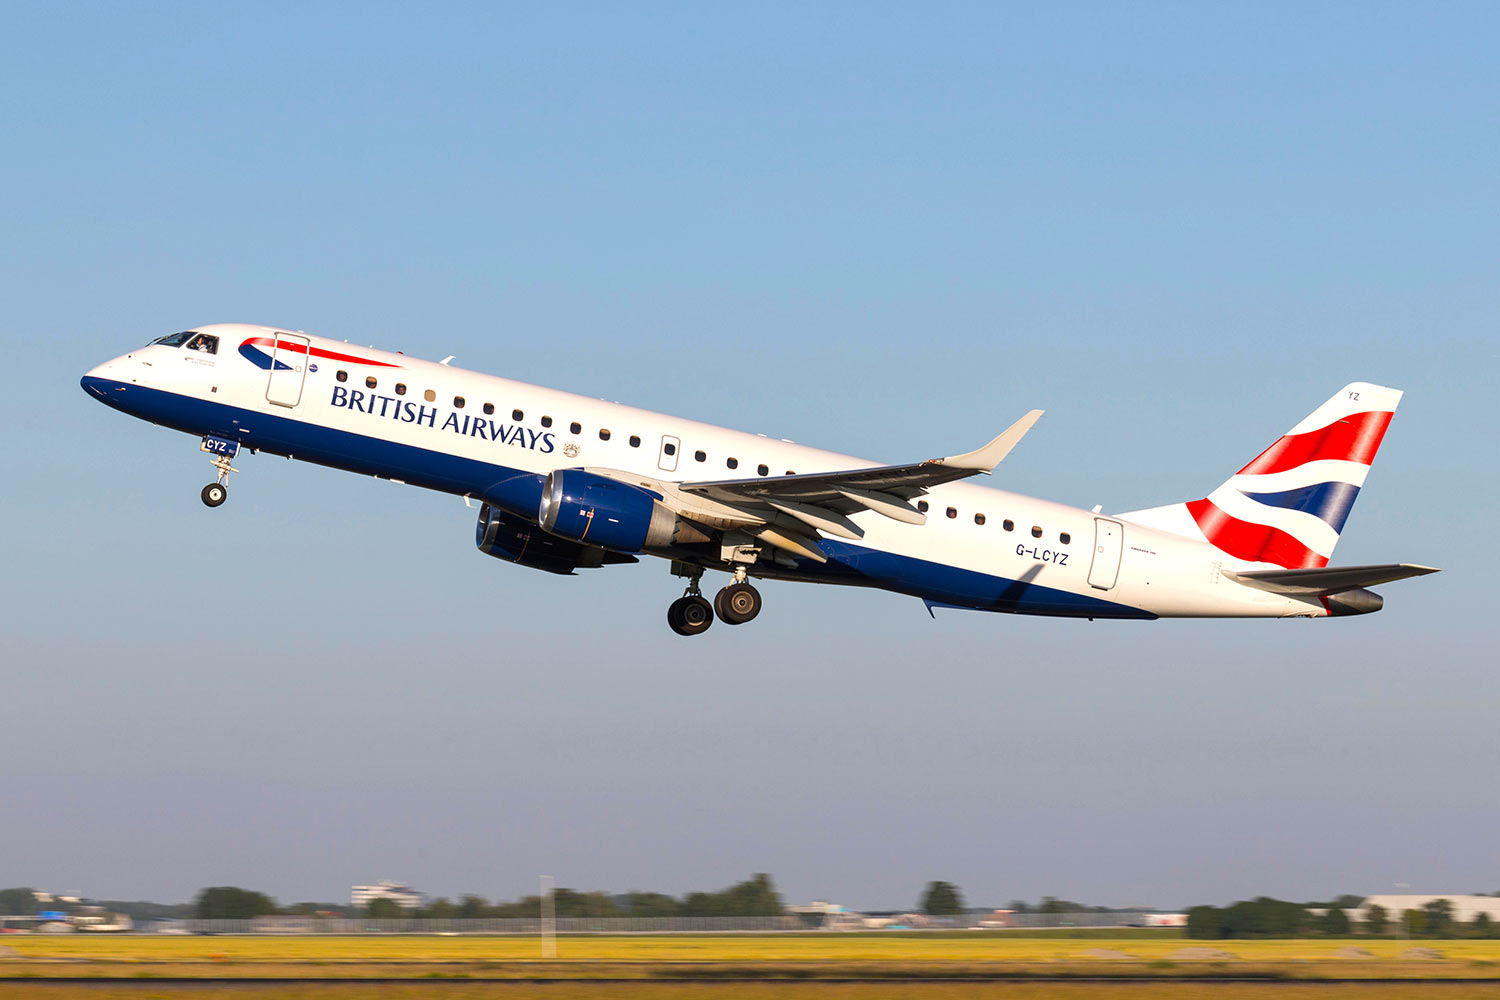 TrueNoord, the specialist regional aircraft lessor, has recently purchased an Embraer E190 (MSN 19000404) from Falko with lease attached. Lessee BA Cityflyer will continue to operate the aircraft.